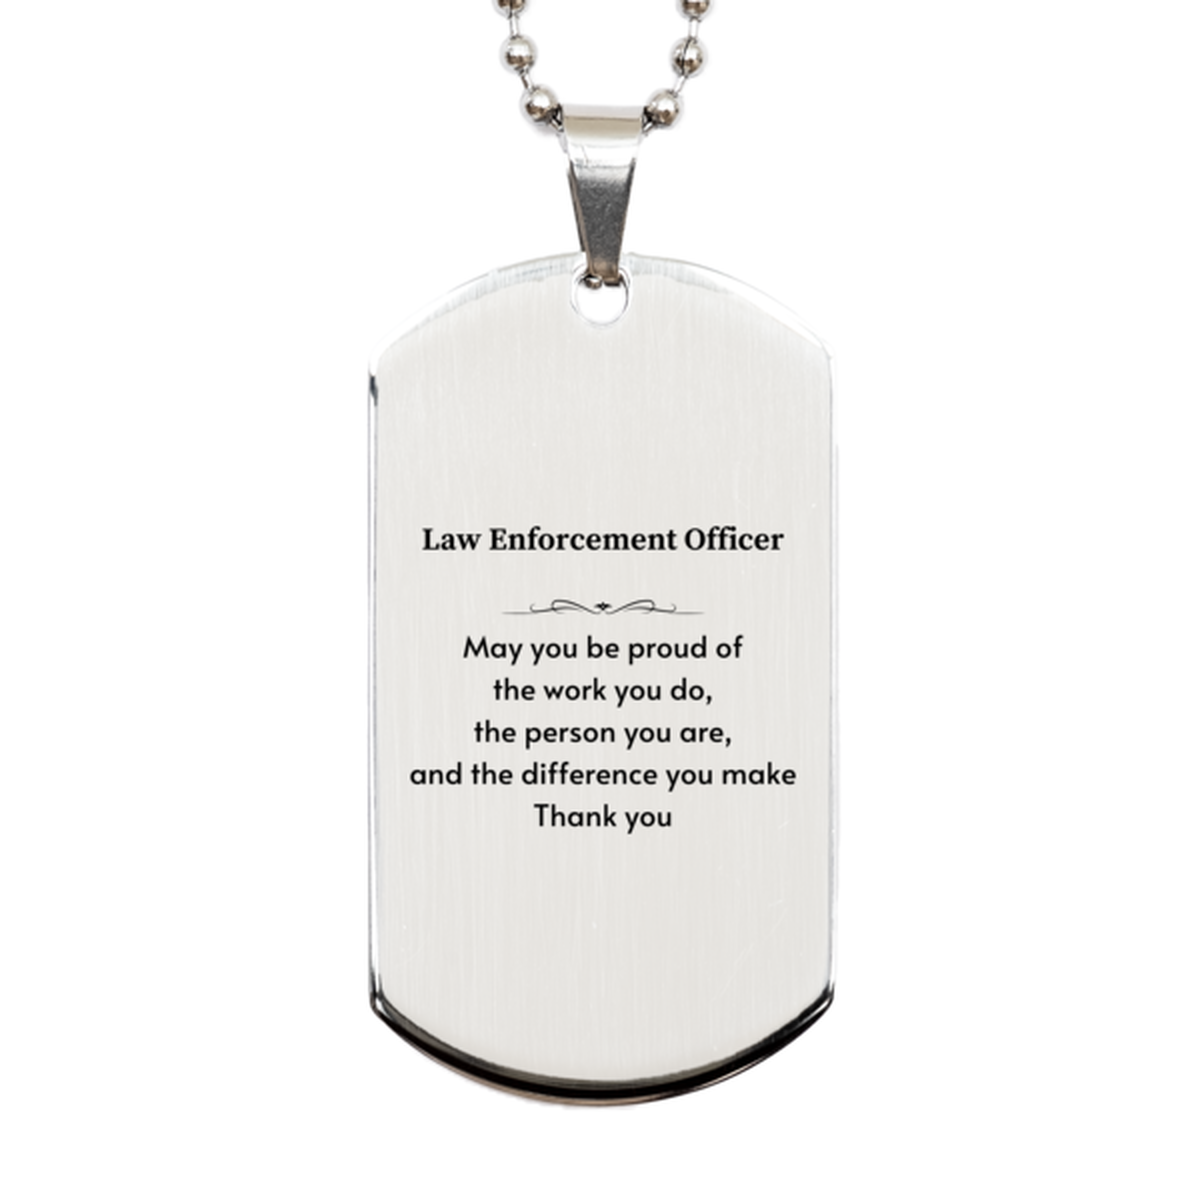 Heartwarming Silver Dog Tag Retirement Coworkers Gifts for Law Enforcement Officer, Law Enforcement Officer May You be proud of the work you do, the person you are Gifts for Boss Men Women Friends